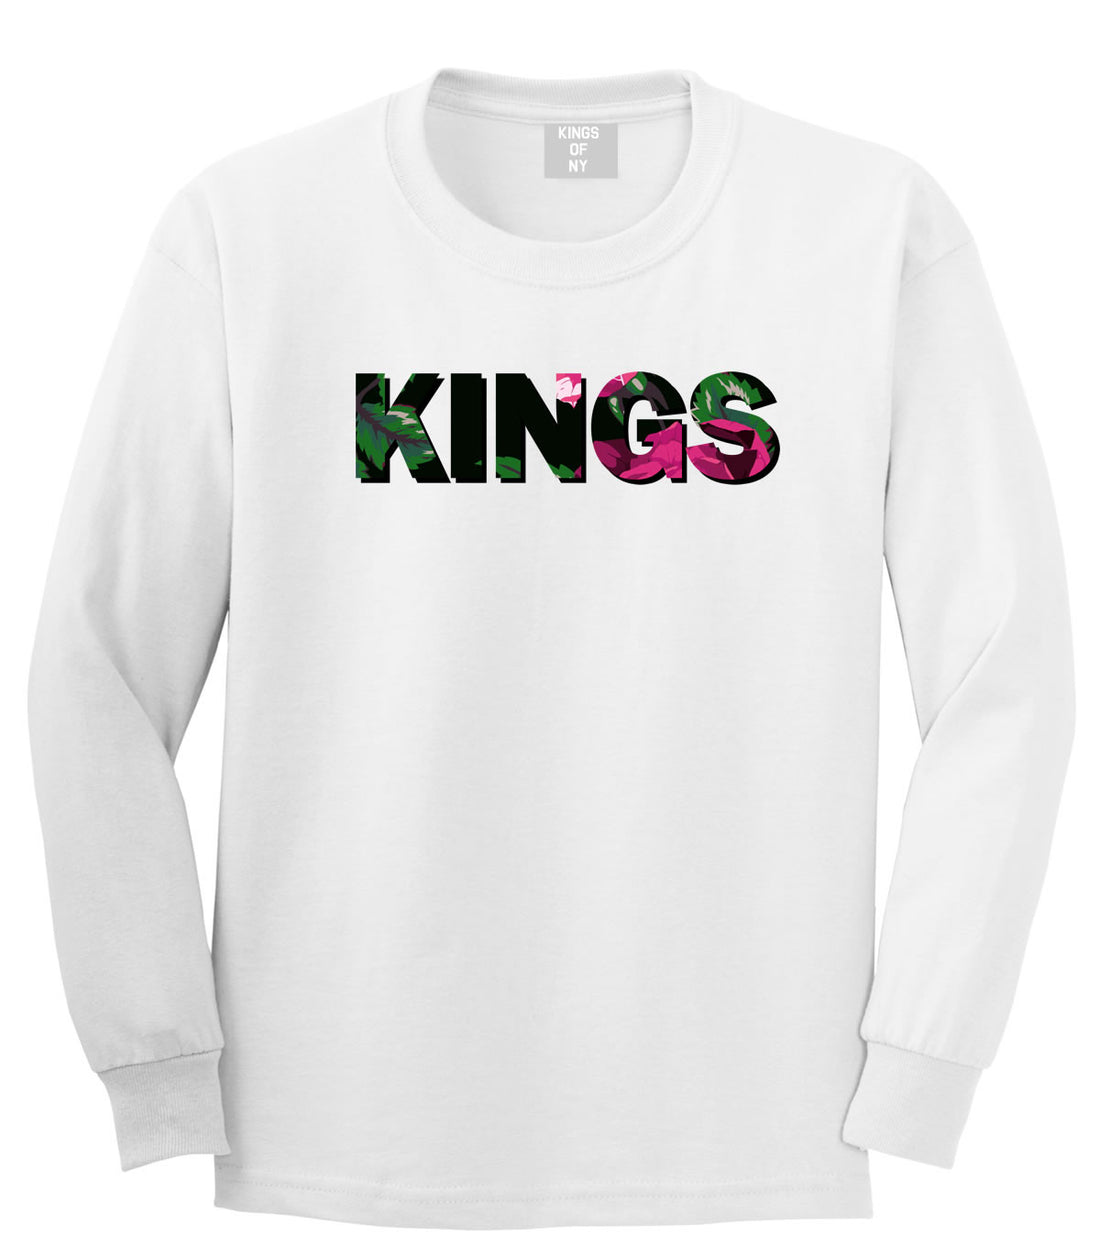 Kings Floral Print Pattern Boys Kids Long Sleeve T-Shirt in White by Kings Of NY